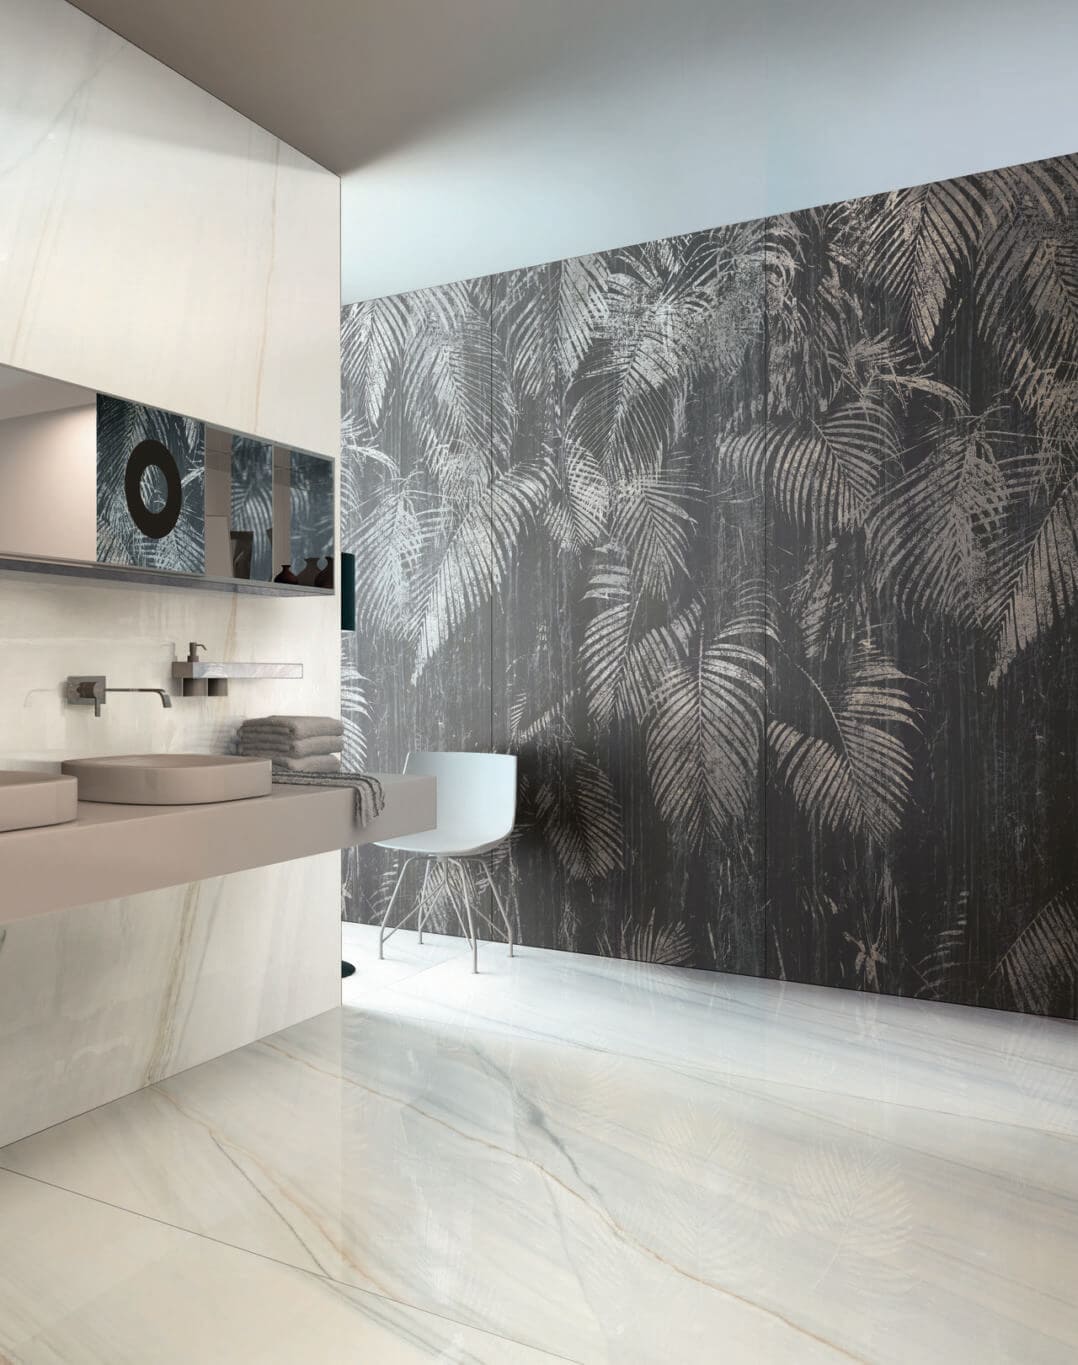 Modern bathroom wall with white gauged porcelain tile slabs in a marble look

